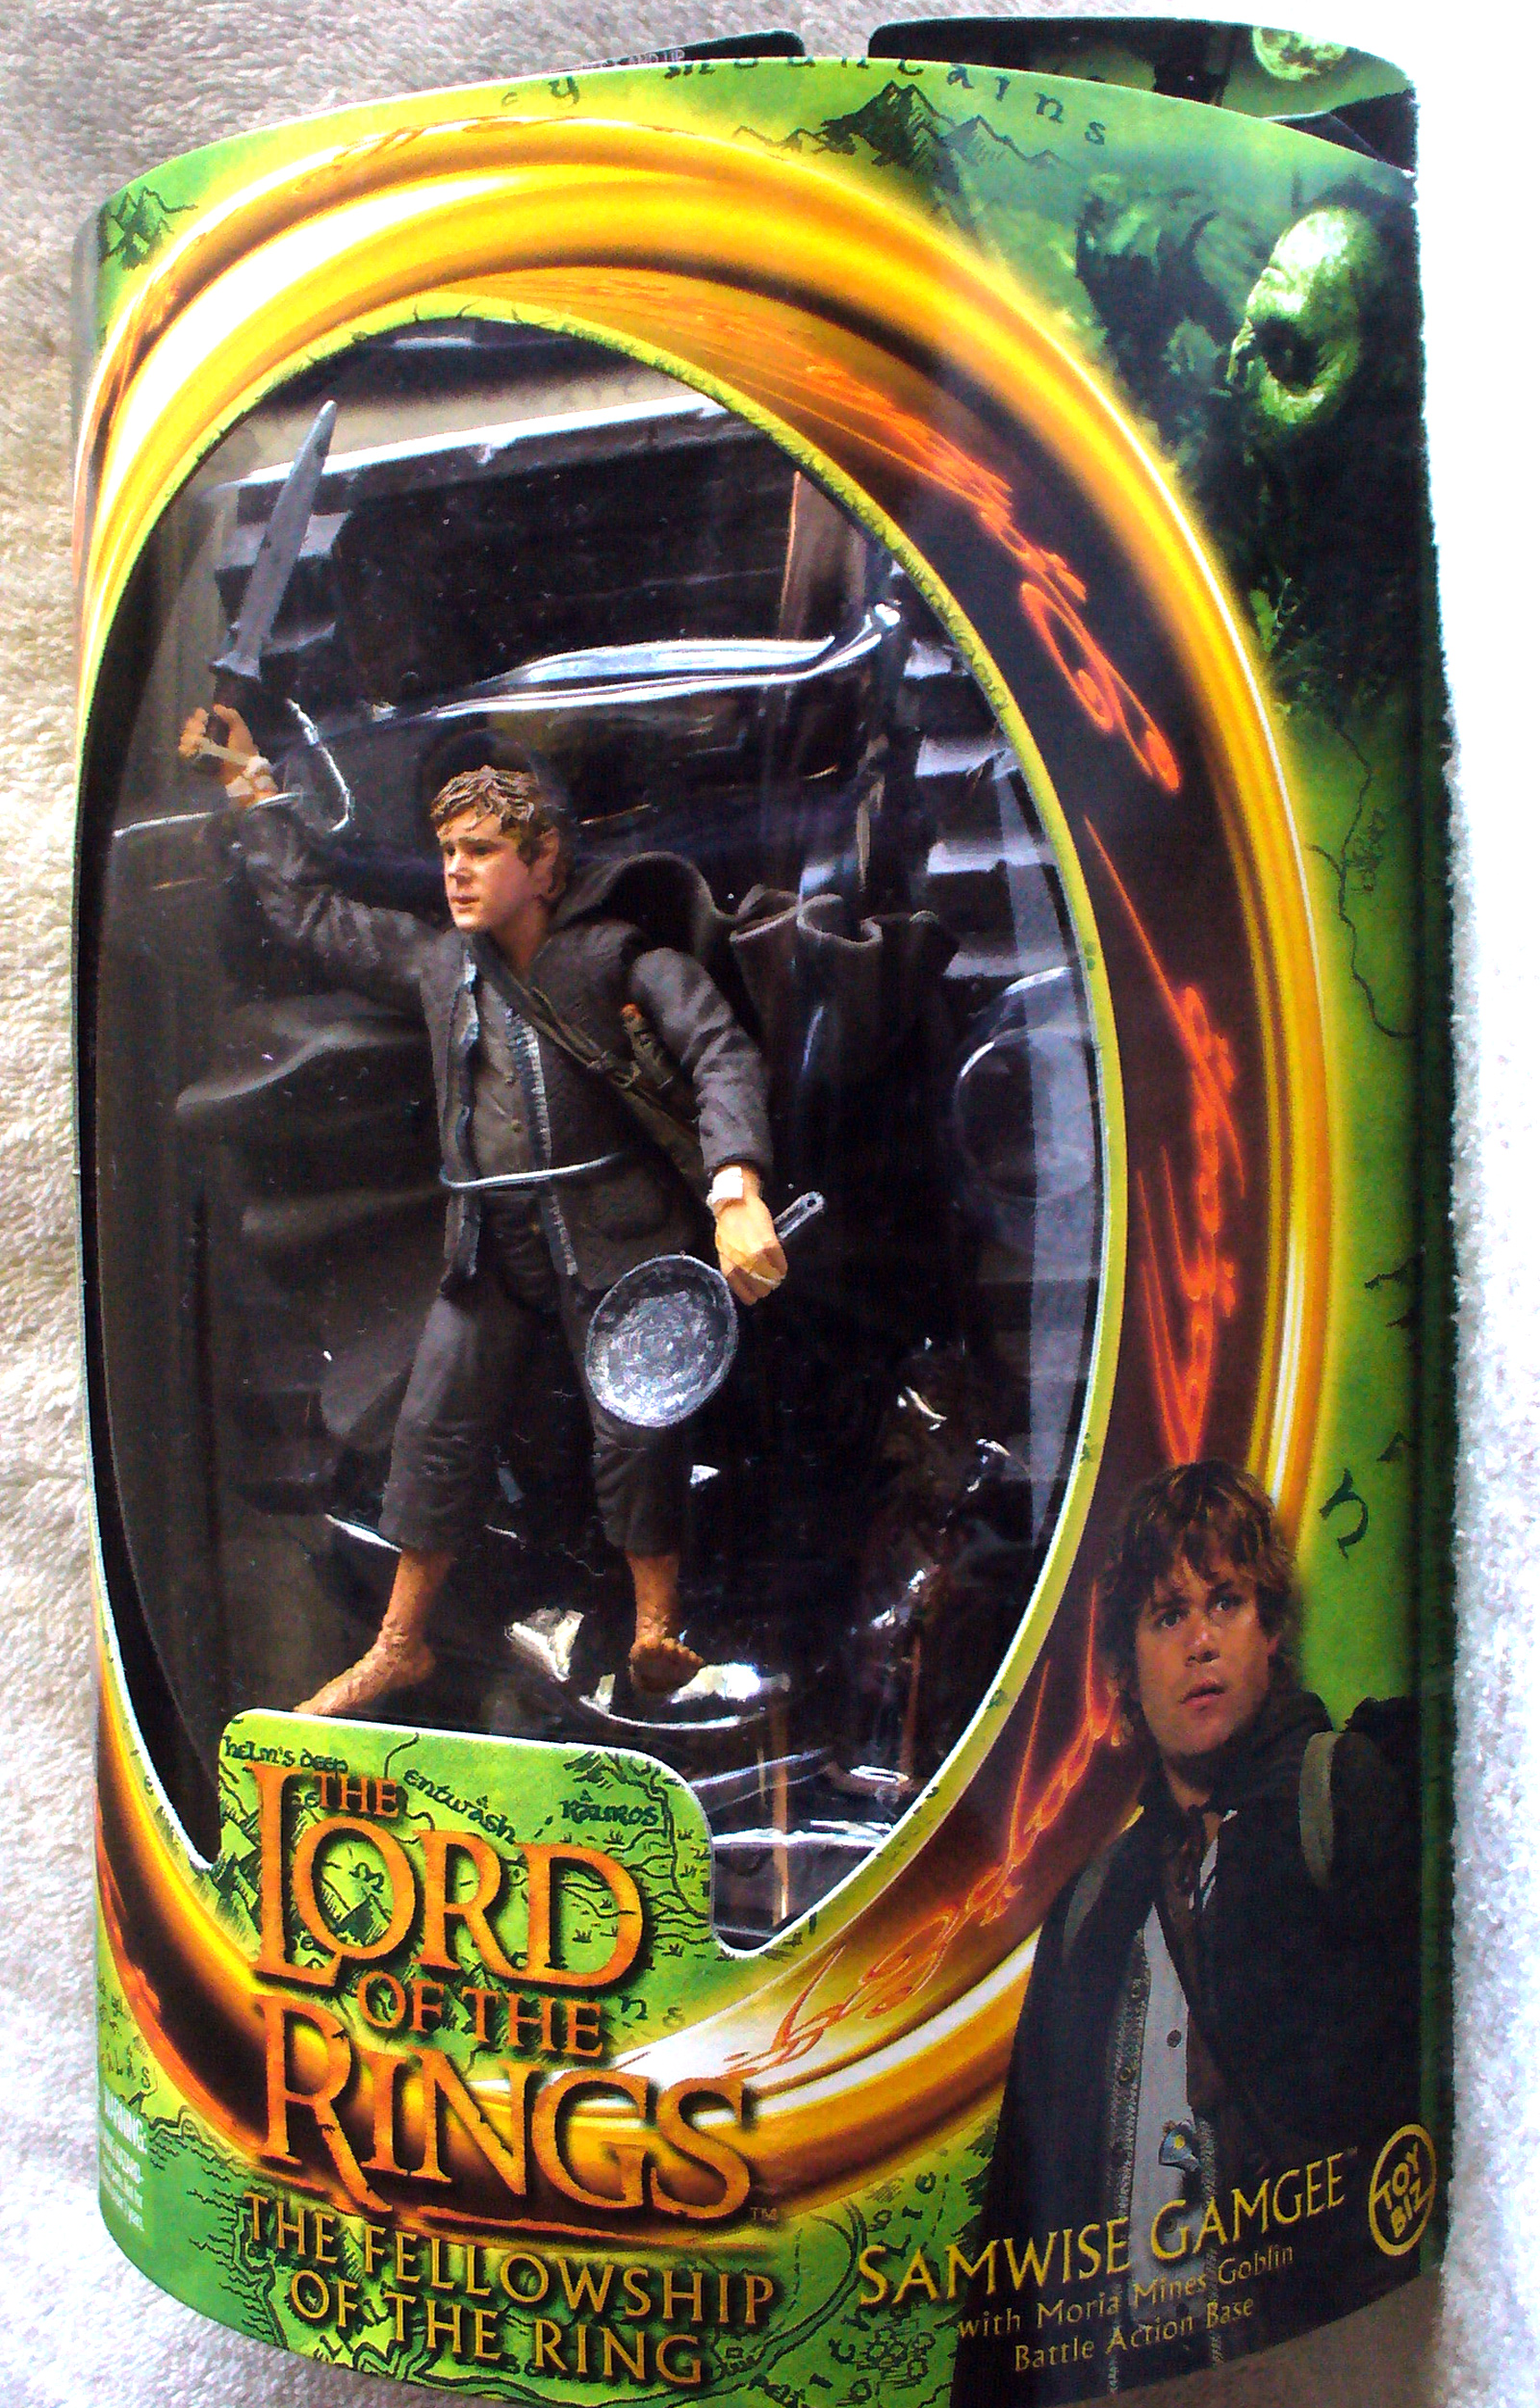 The Lord of The Rings Fellowship of the Ring Samwise Gamgee - Figurák Akciófigurák